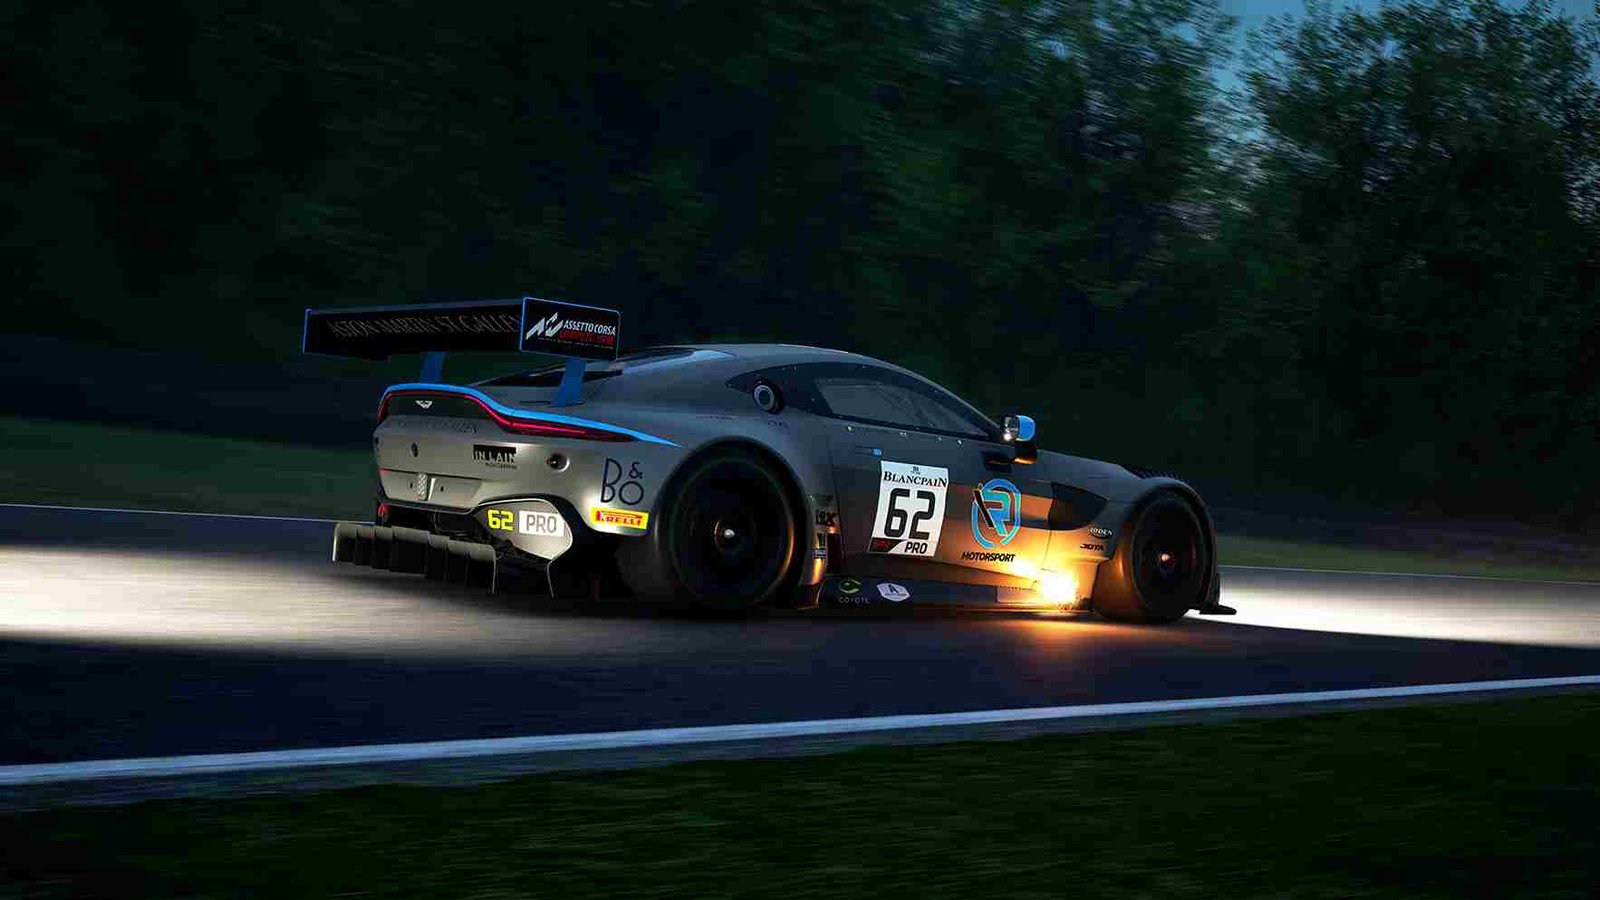 Assetto Corsa Competizione fatal error & crashes troubling players after new DLC update